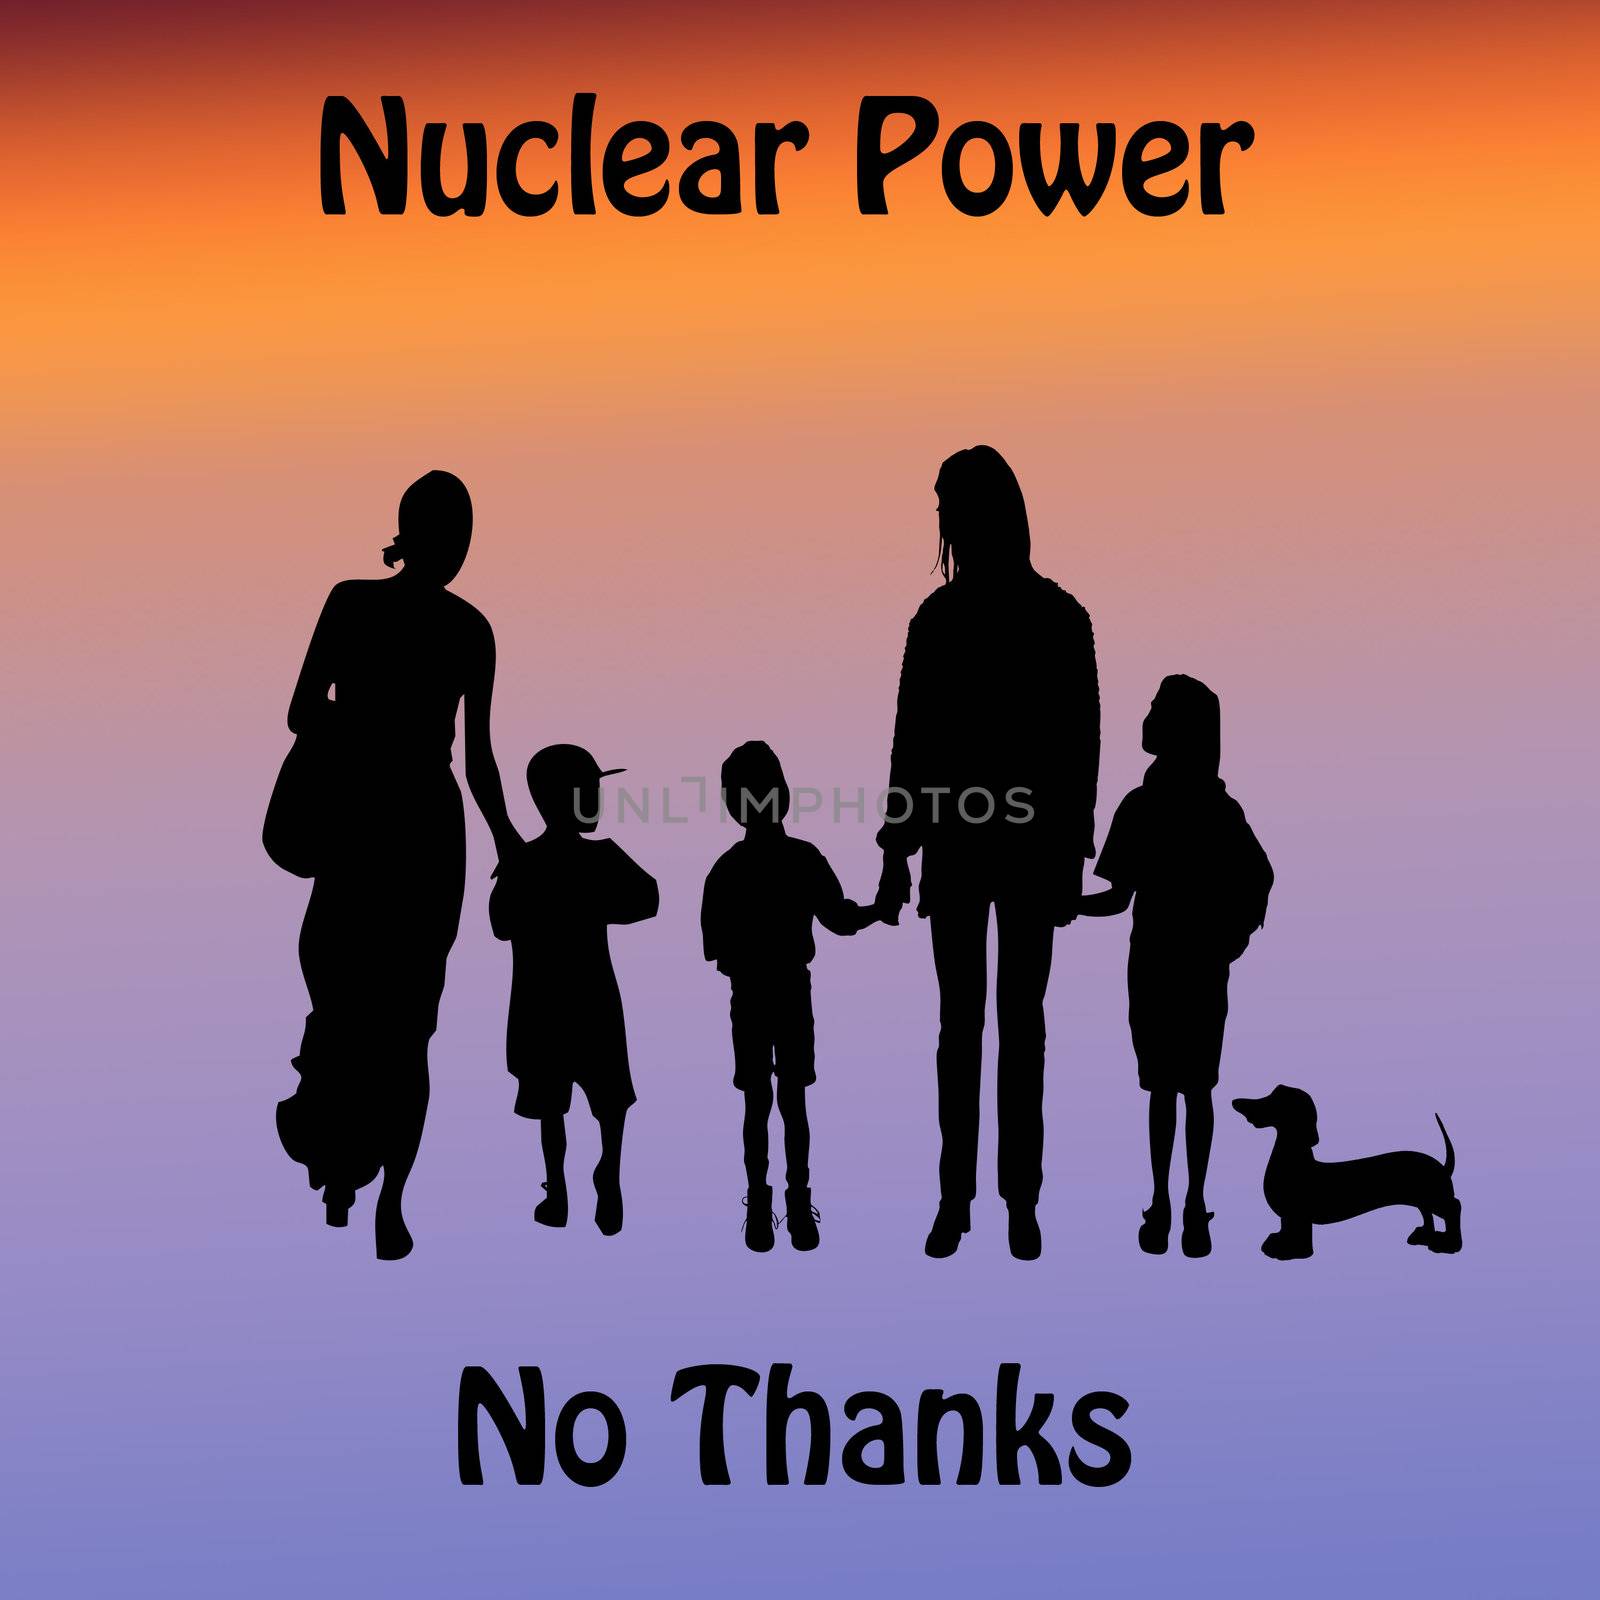 nuclear power protest by hicster